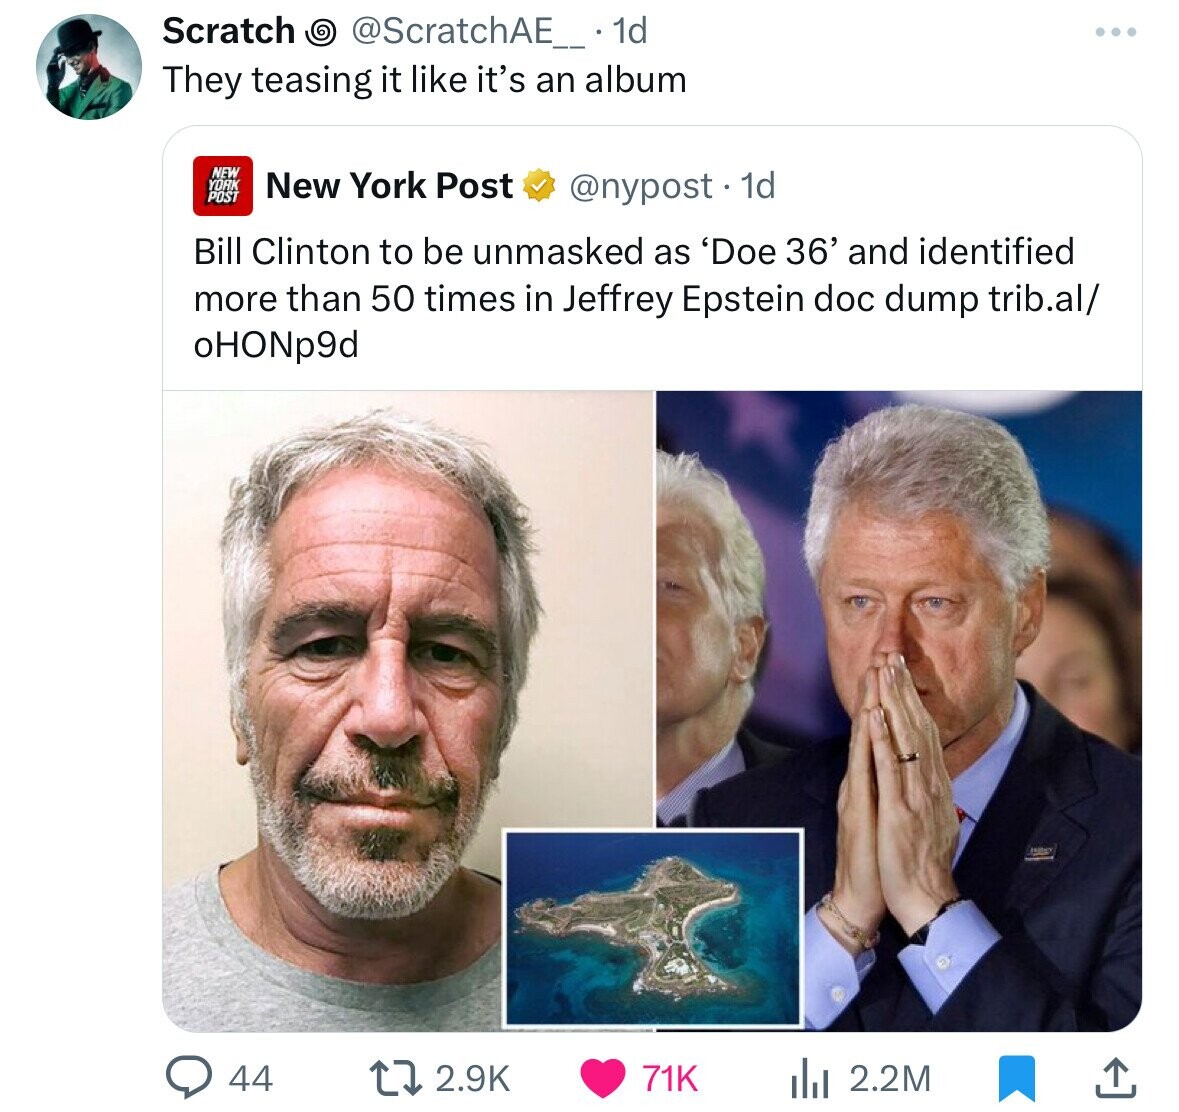 facial expression - Scratch They teasing it it's an album New York New York Post Post 44 1d Bill Clinton to be unmasked as 'Doe 36' and identified more than 50 times in Jeffrey Epstein doc dump trib.al OHONp9d . 71K il 2.2M Anishy ... S